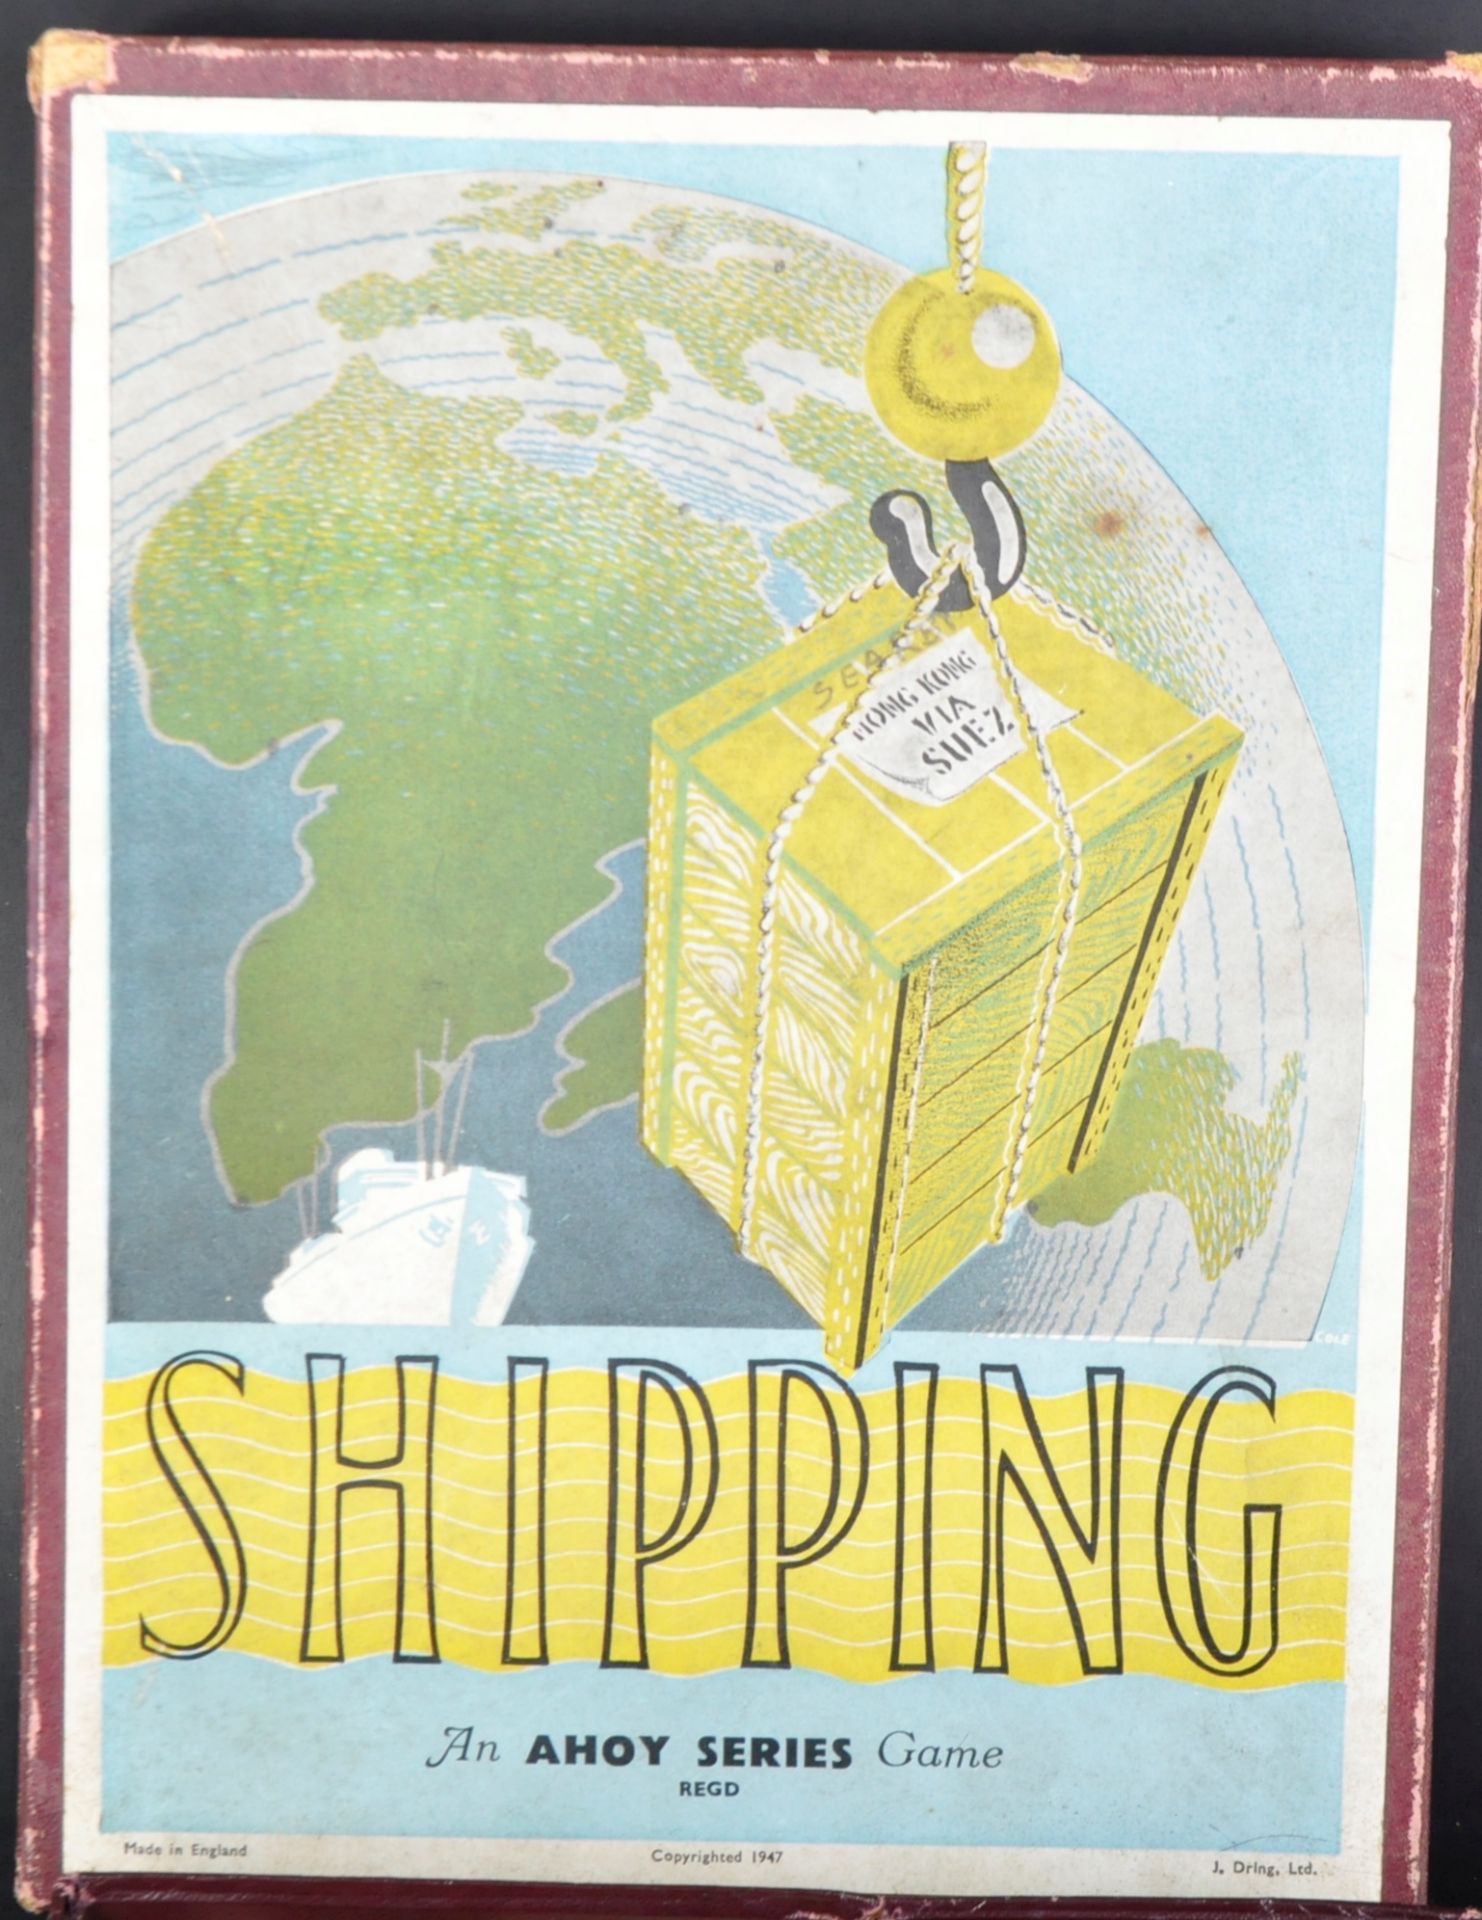 VINTAGE AHOY SERIES SHIPPING BOARD GAME - Image 3 of 6